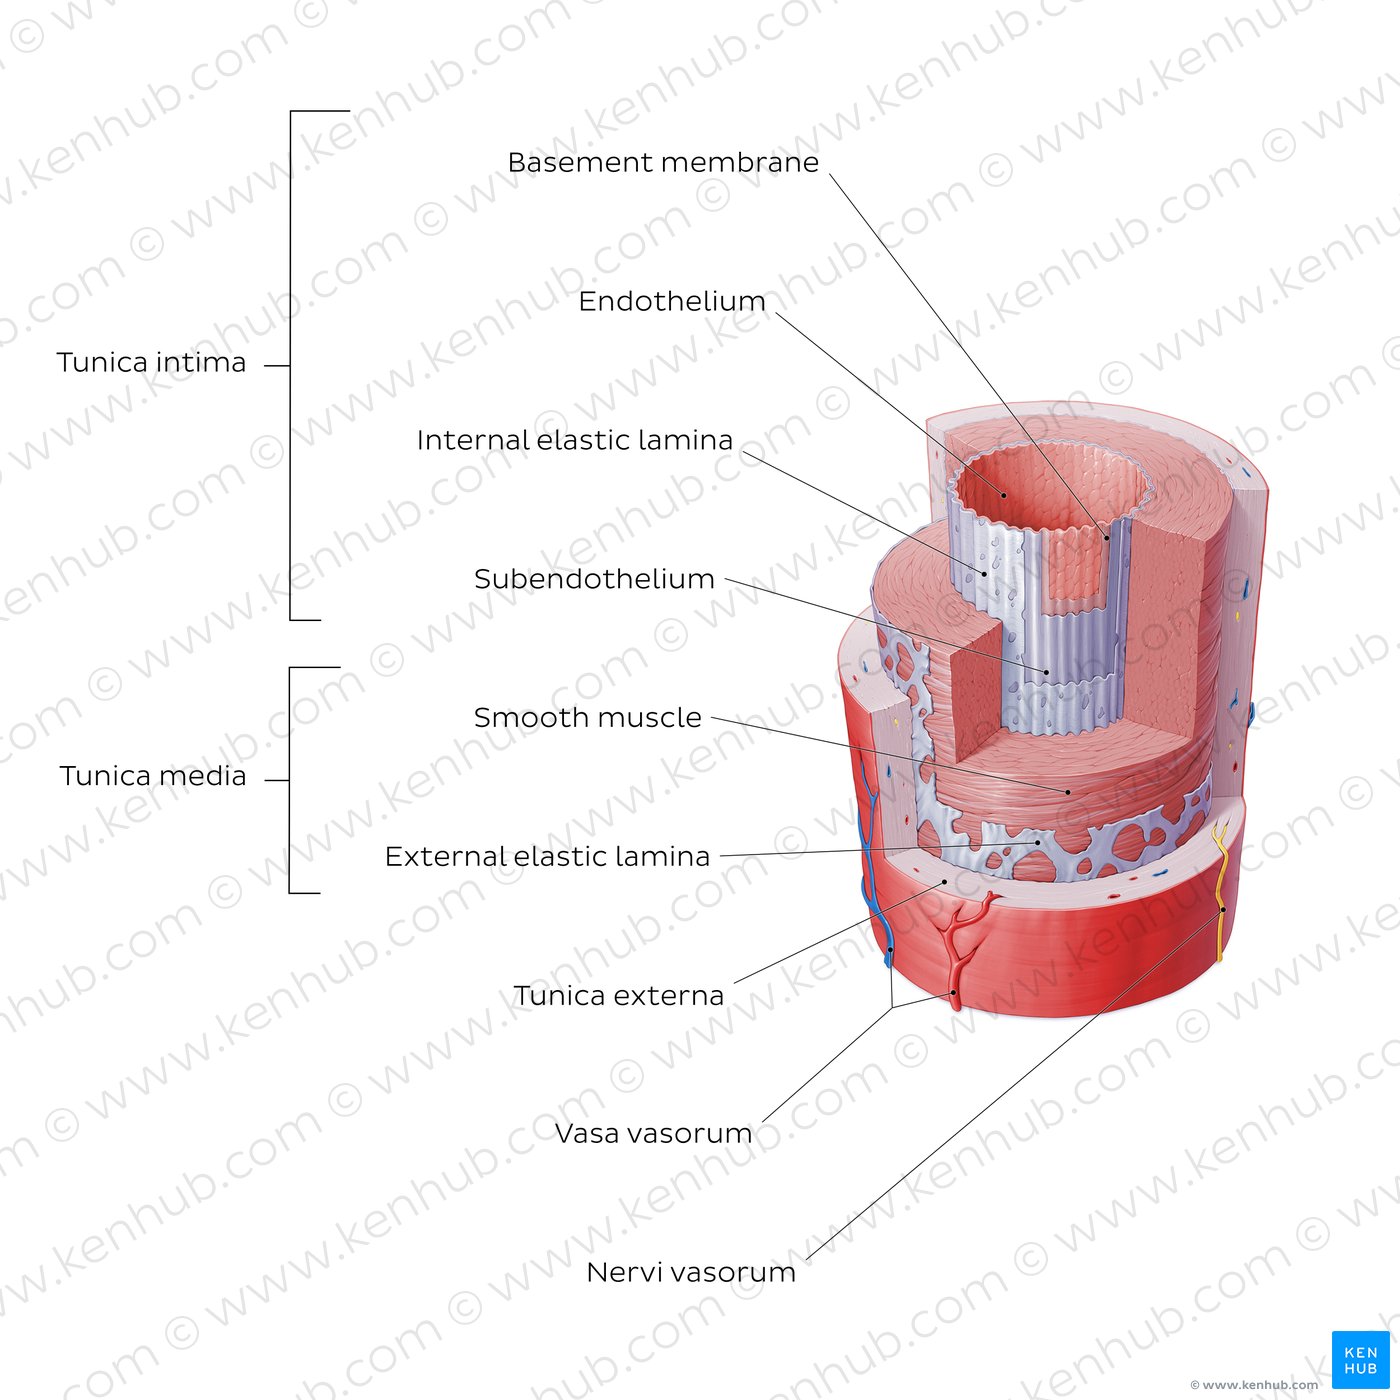 Structure of blood vessels: Artery